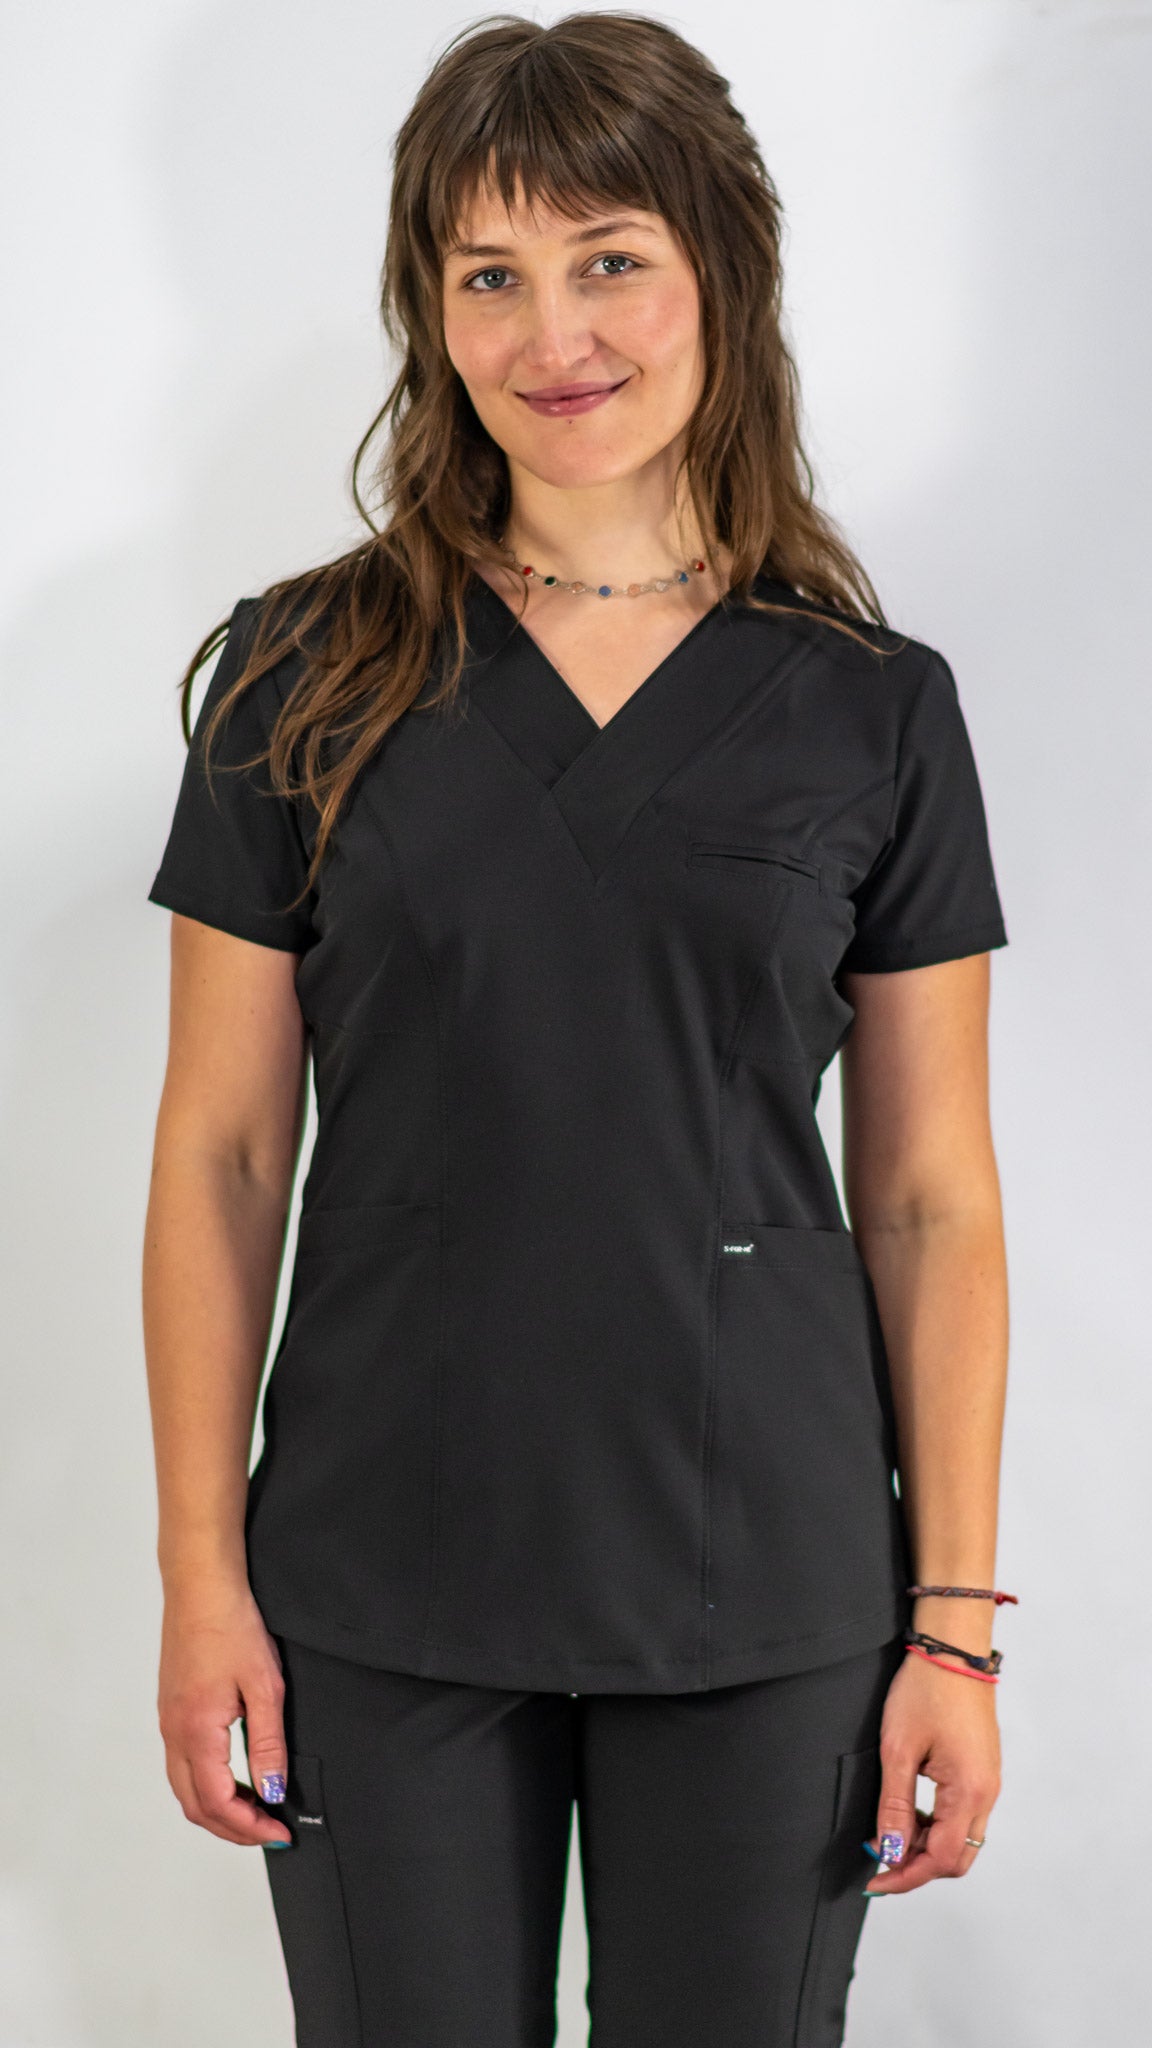 Women's Top 501 Stretch Fways Black – S-FOR-ME Scrubs